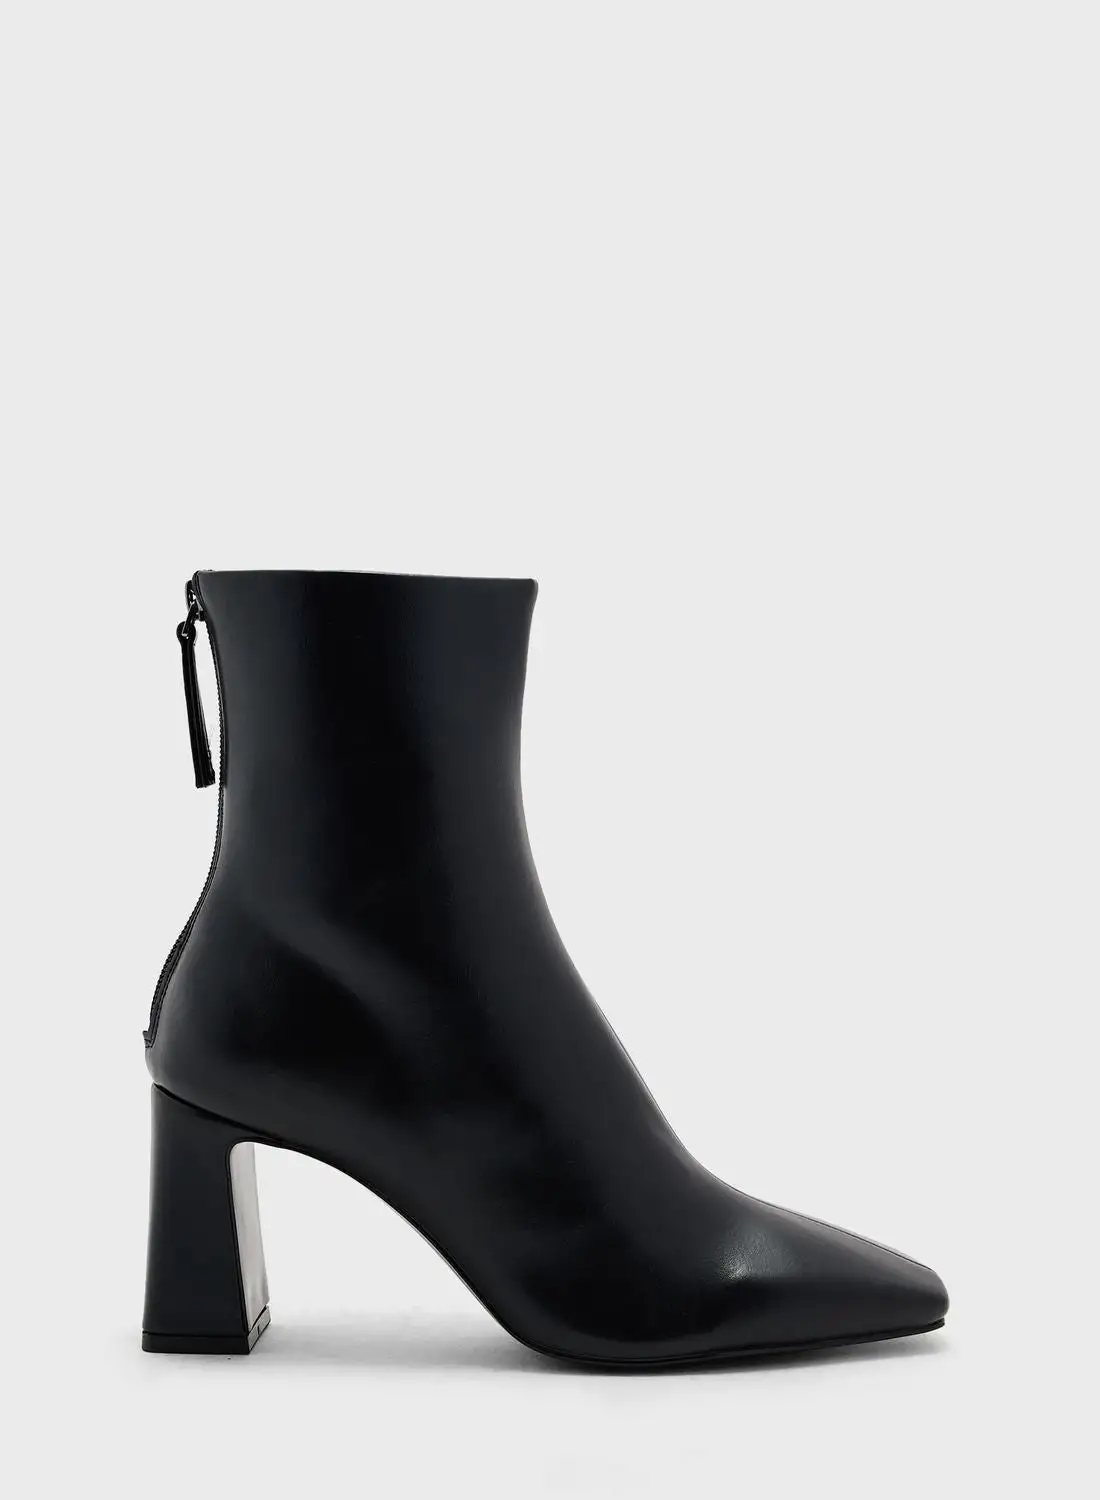 MANGO Limo Ankle Boots